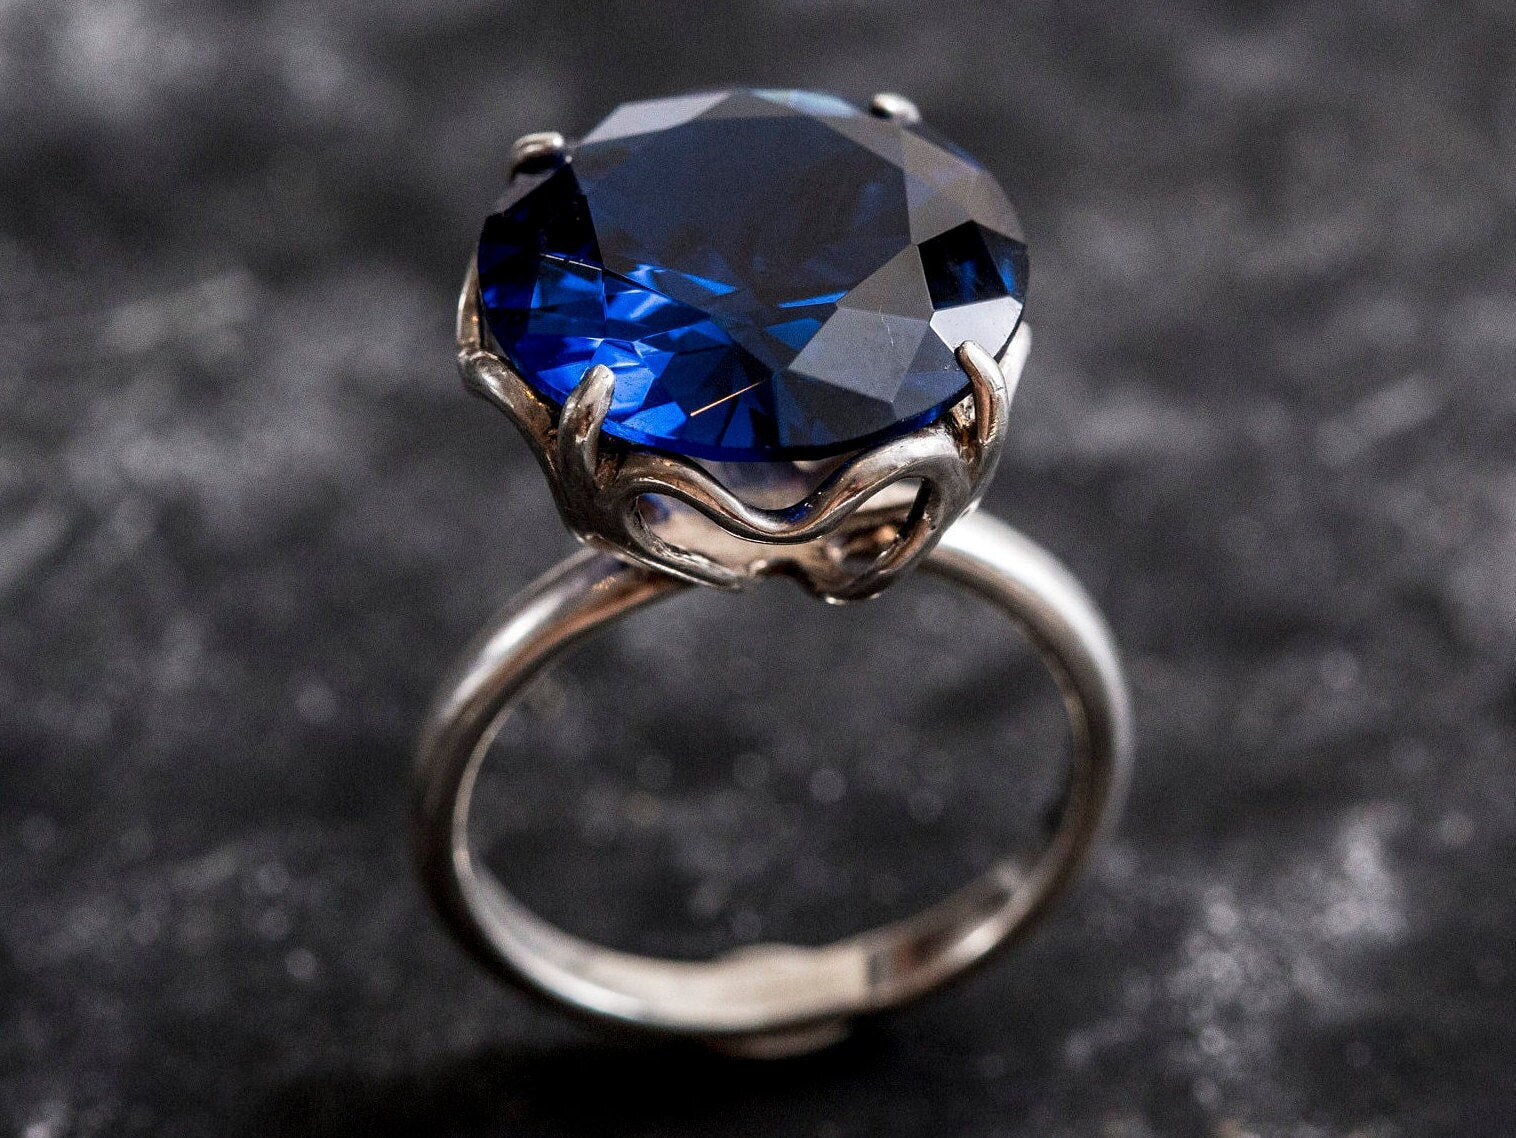 Blue Sapphire Ring, Created Sapphire, 15 Carats Sapphire, Large Sapphire Ring, Vintage Sapphire Ring, Sapphire Ring, Solid Silver Ring